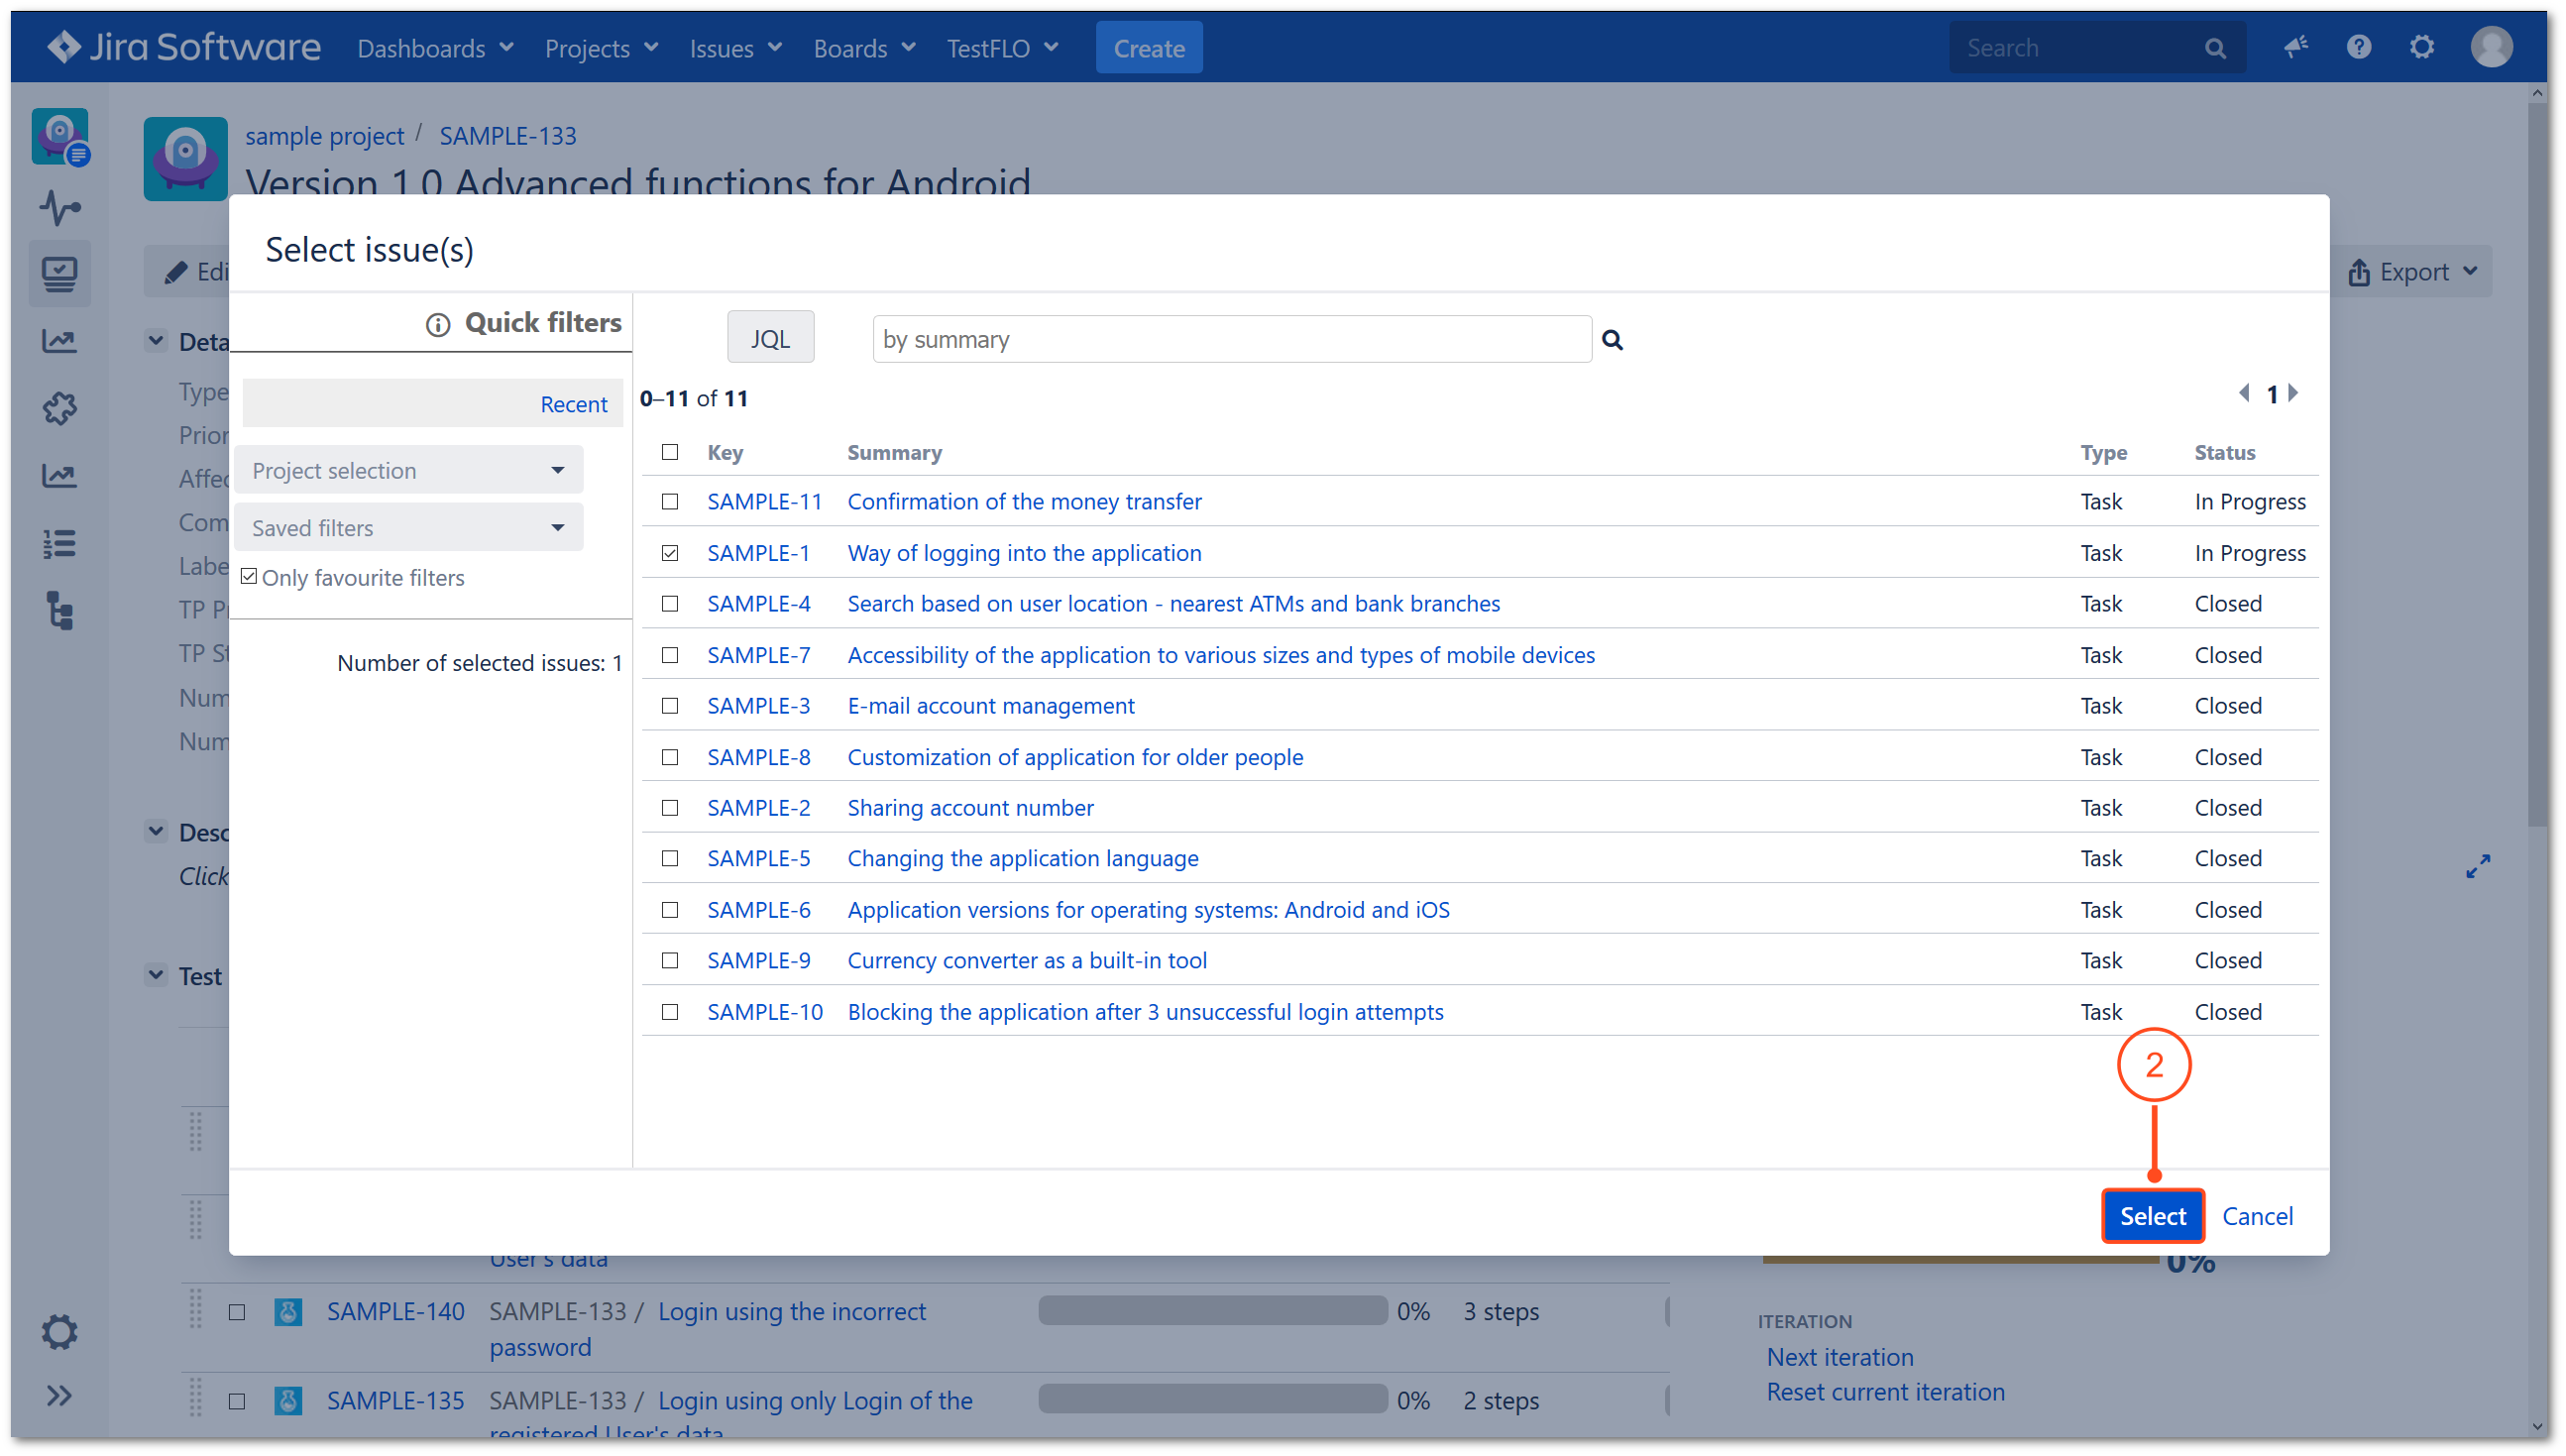 Link with Requirement operation in TestFLO Jira Test Management